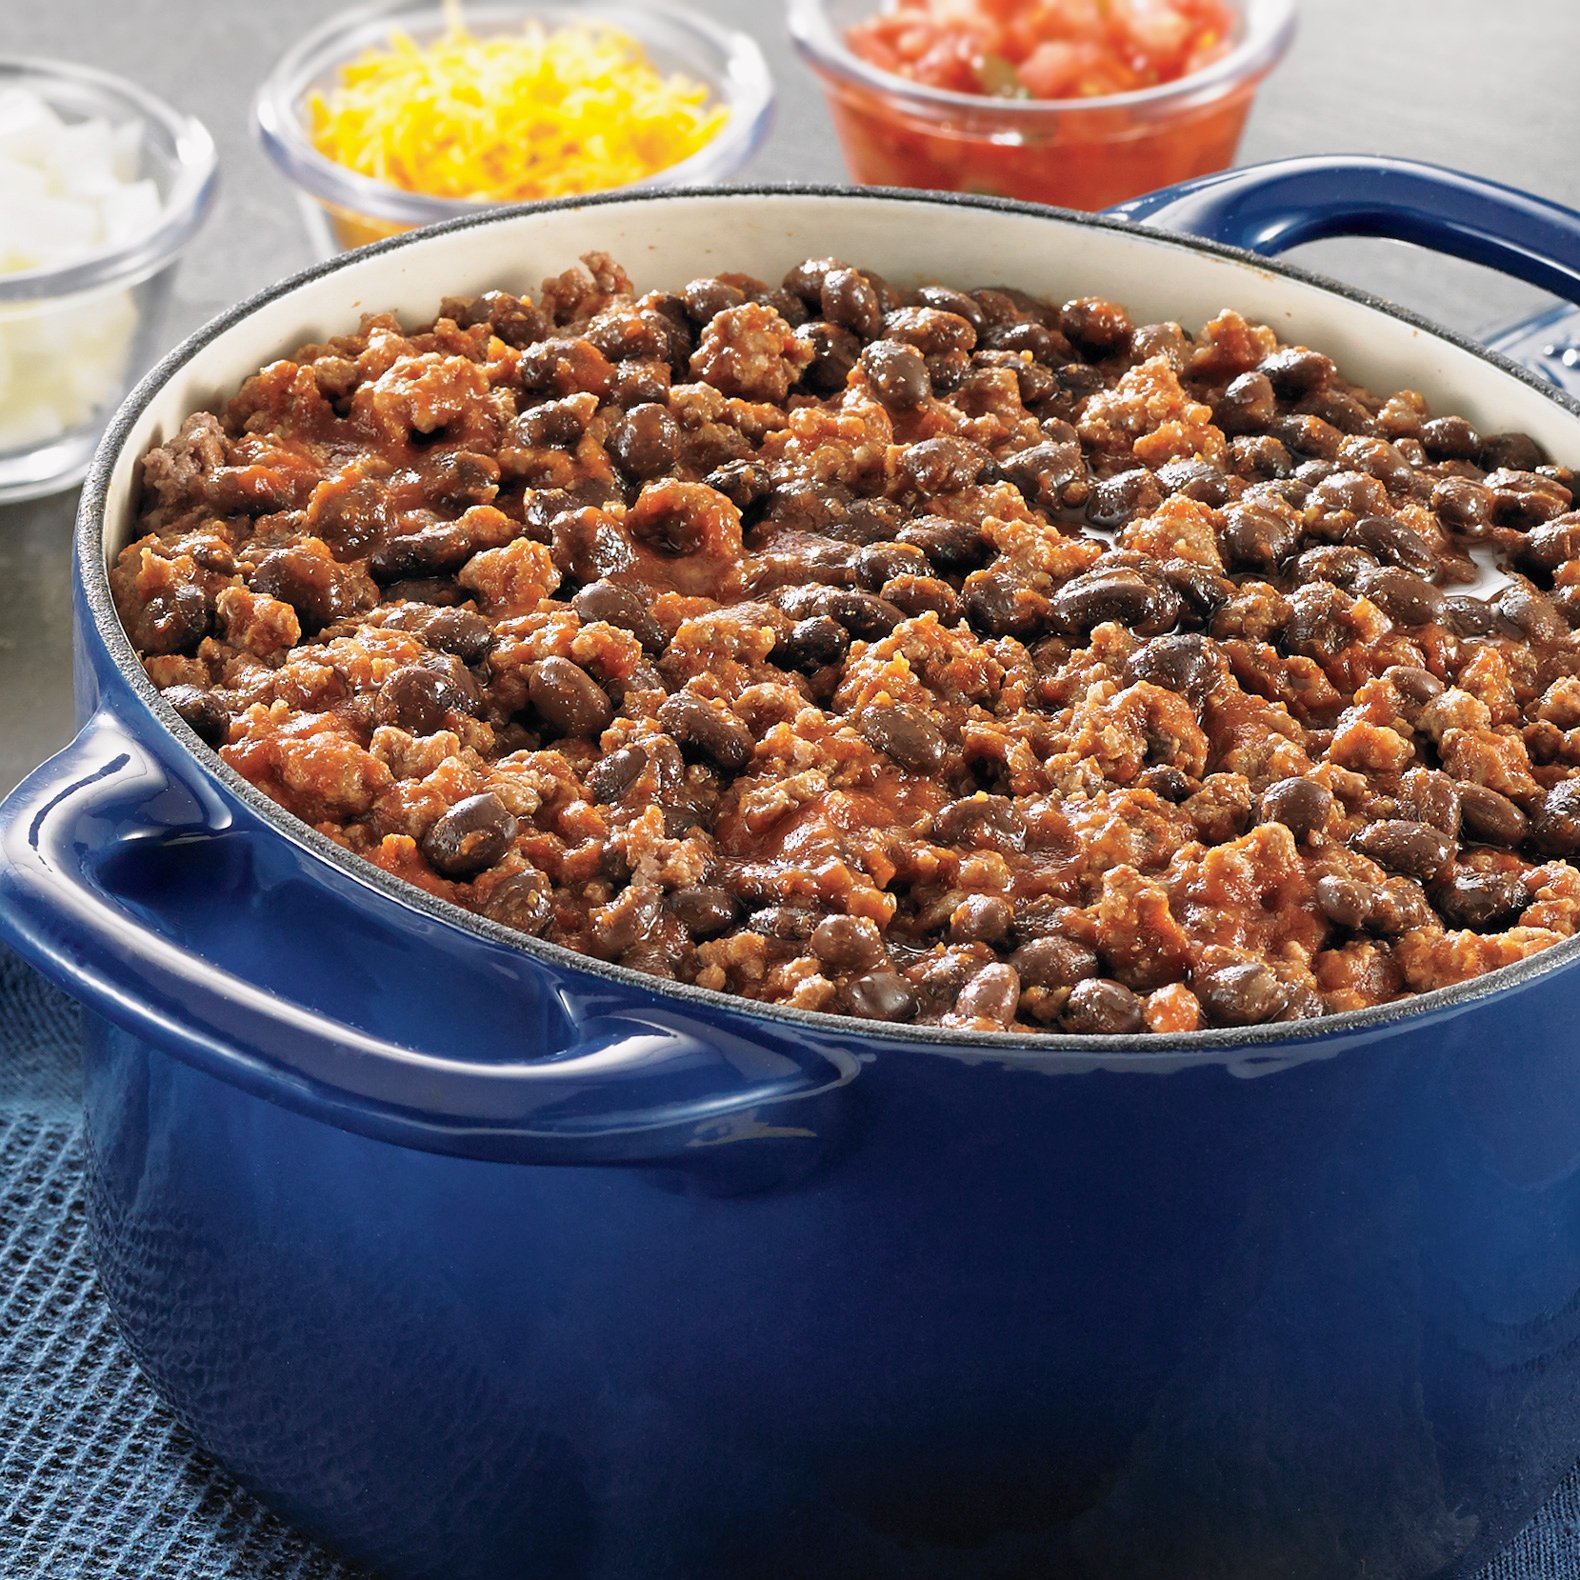 Texas 2-Step Chili Recipe from